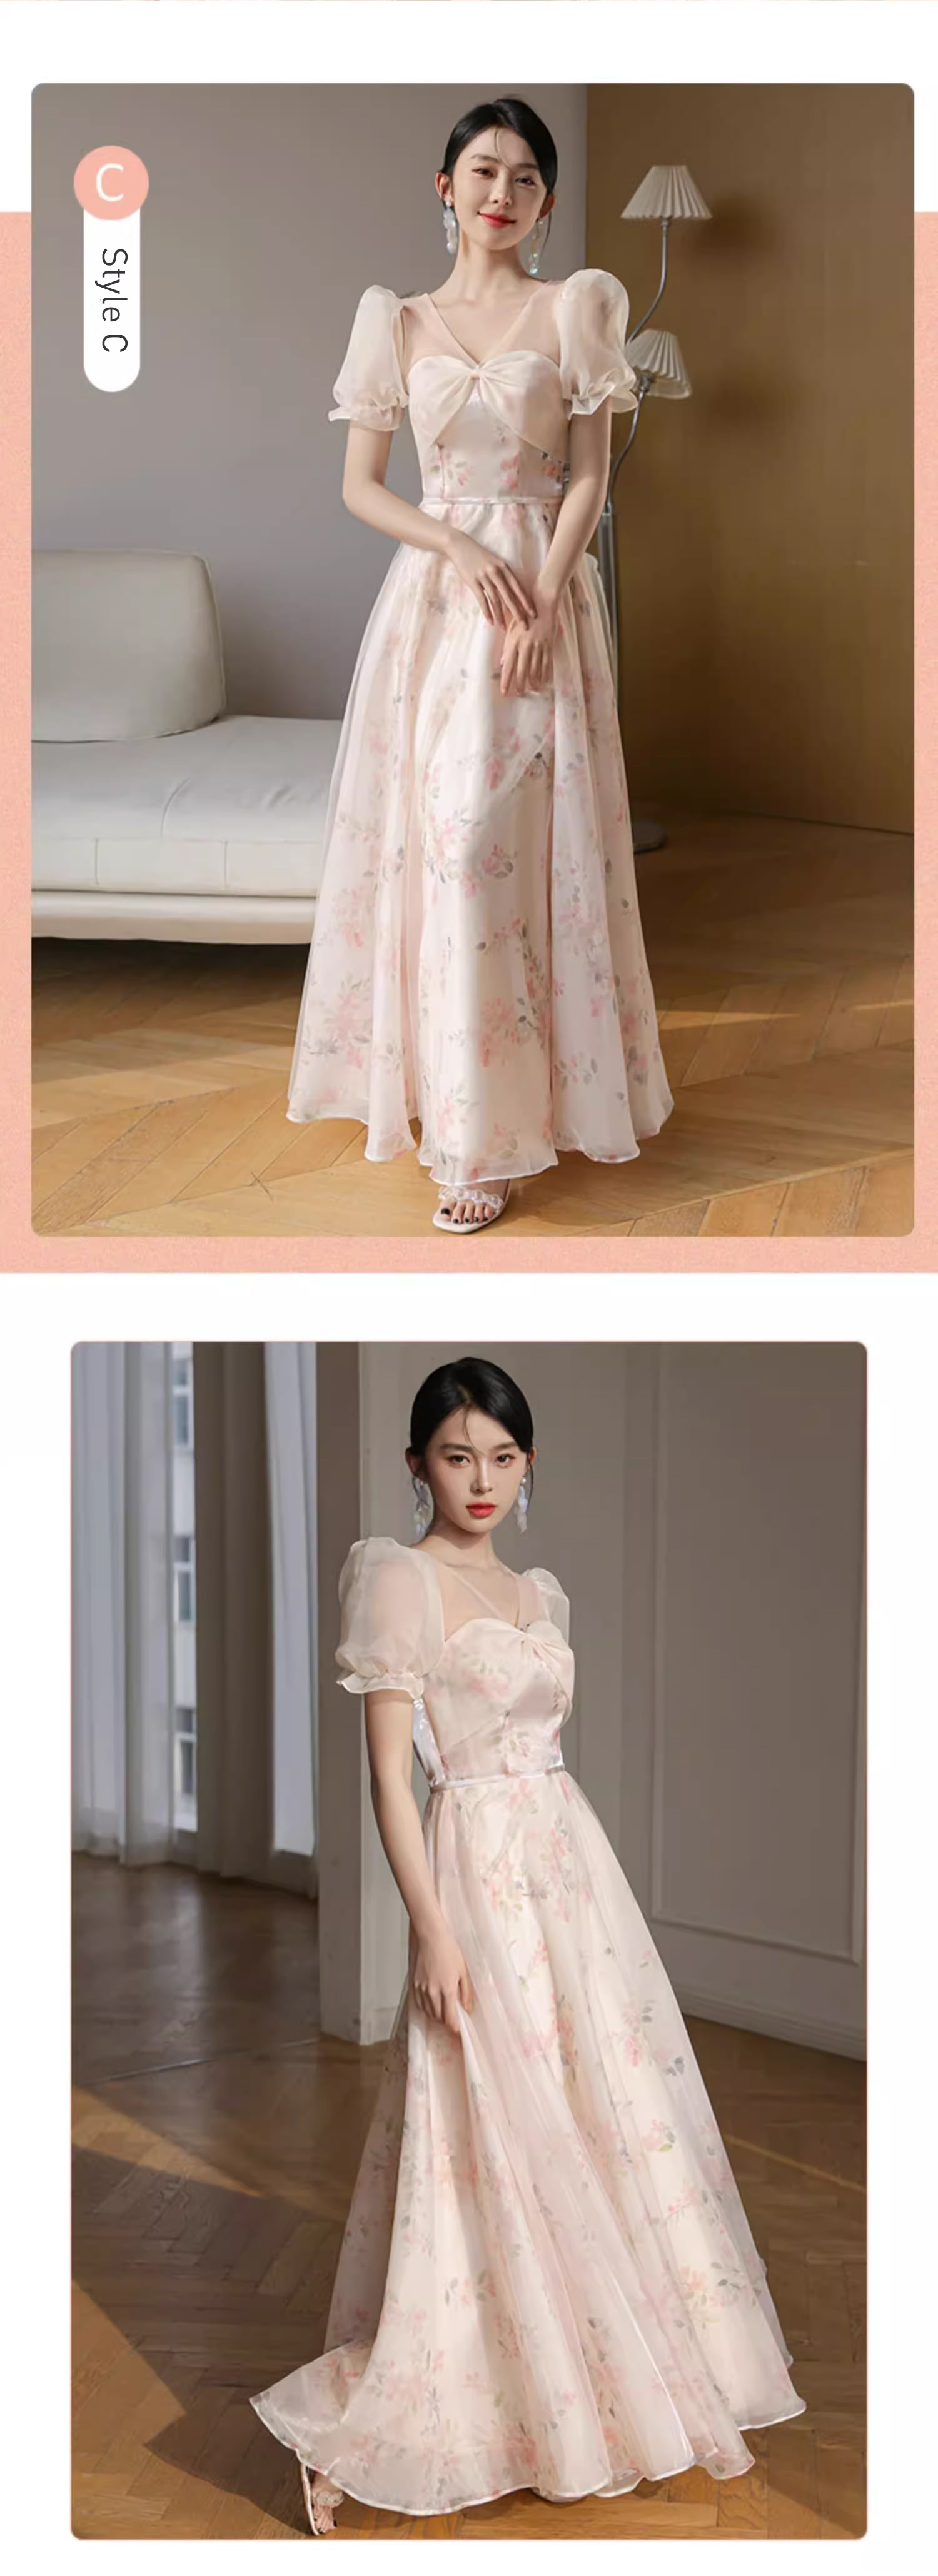 Sweet-A-line-Chiffon-Pink-Floral-Tulle-Maxi-Cocktail-Bridesmaid-Dress17